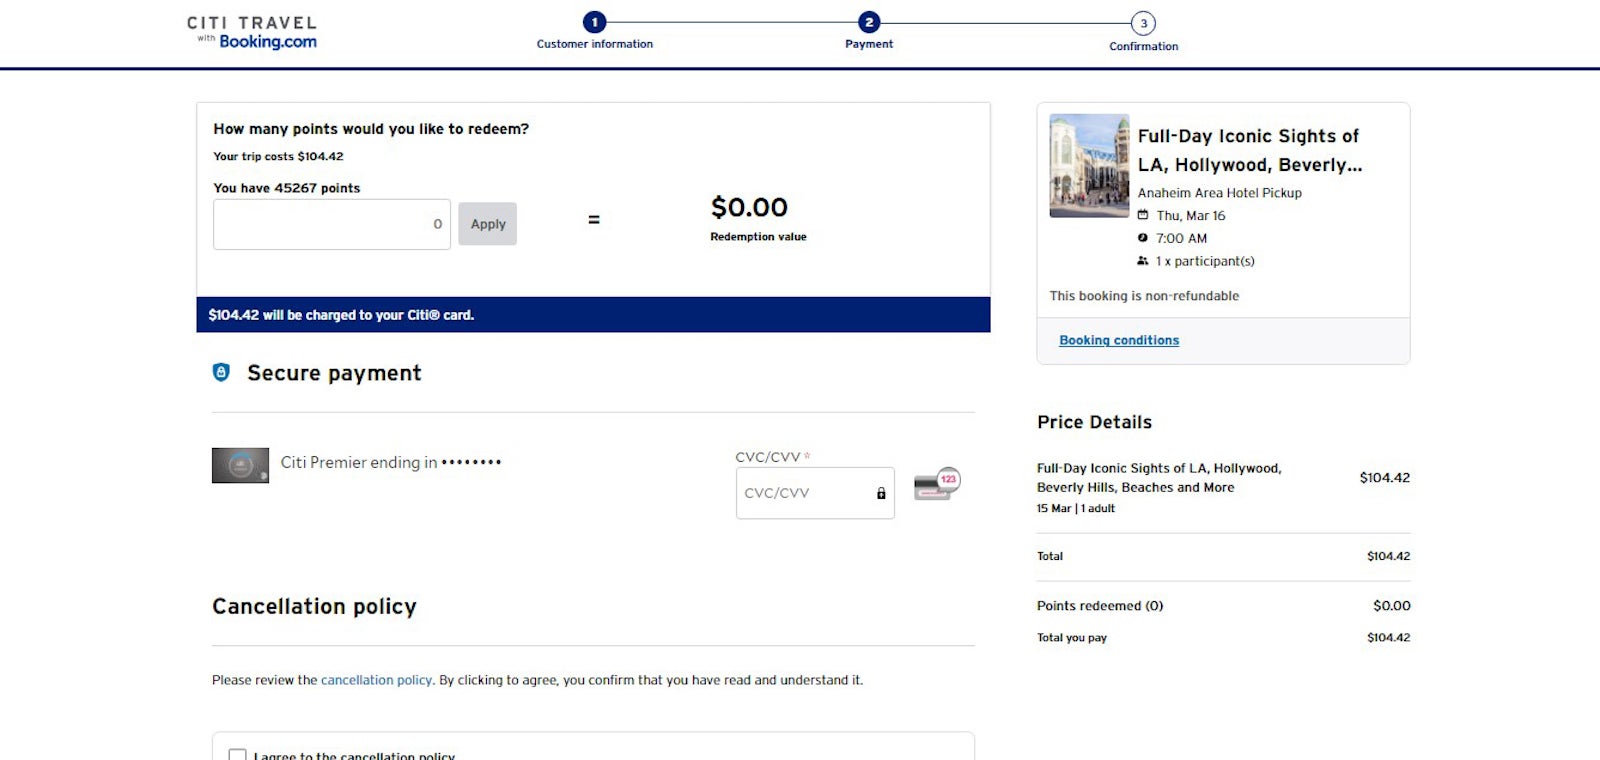 payment page in the new Citi travel portal, showing the option to pay with points or cash